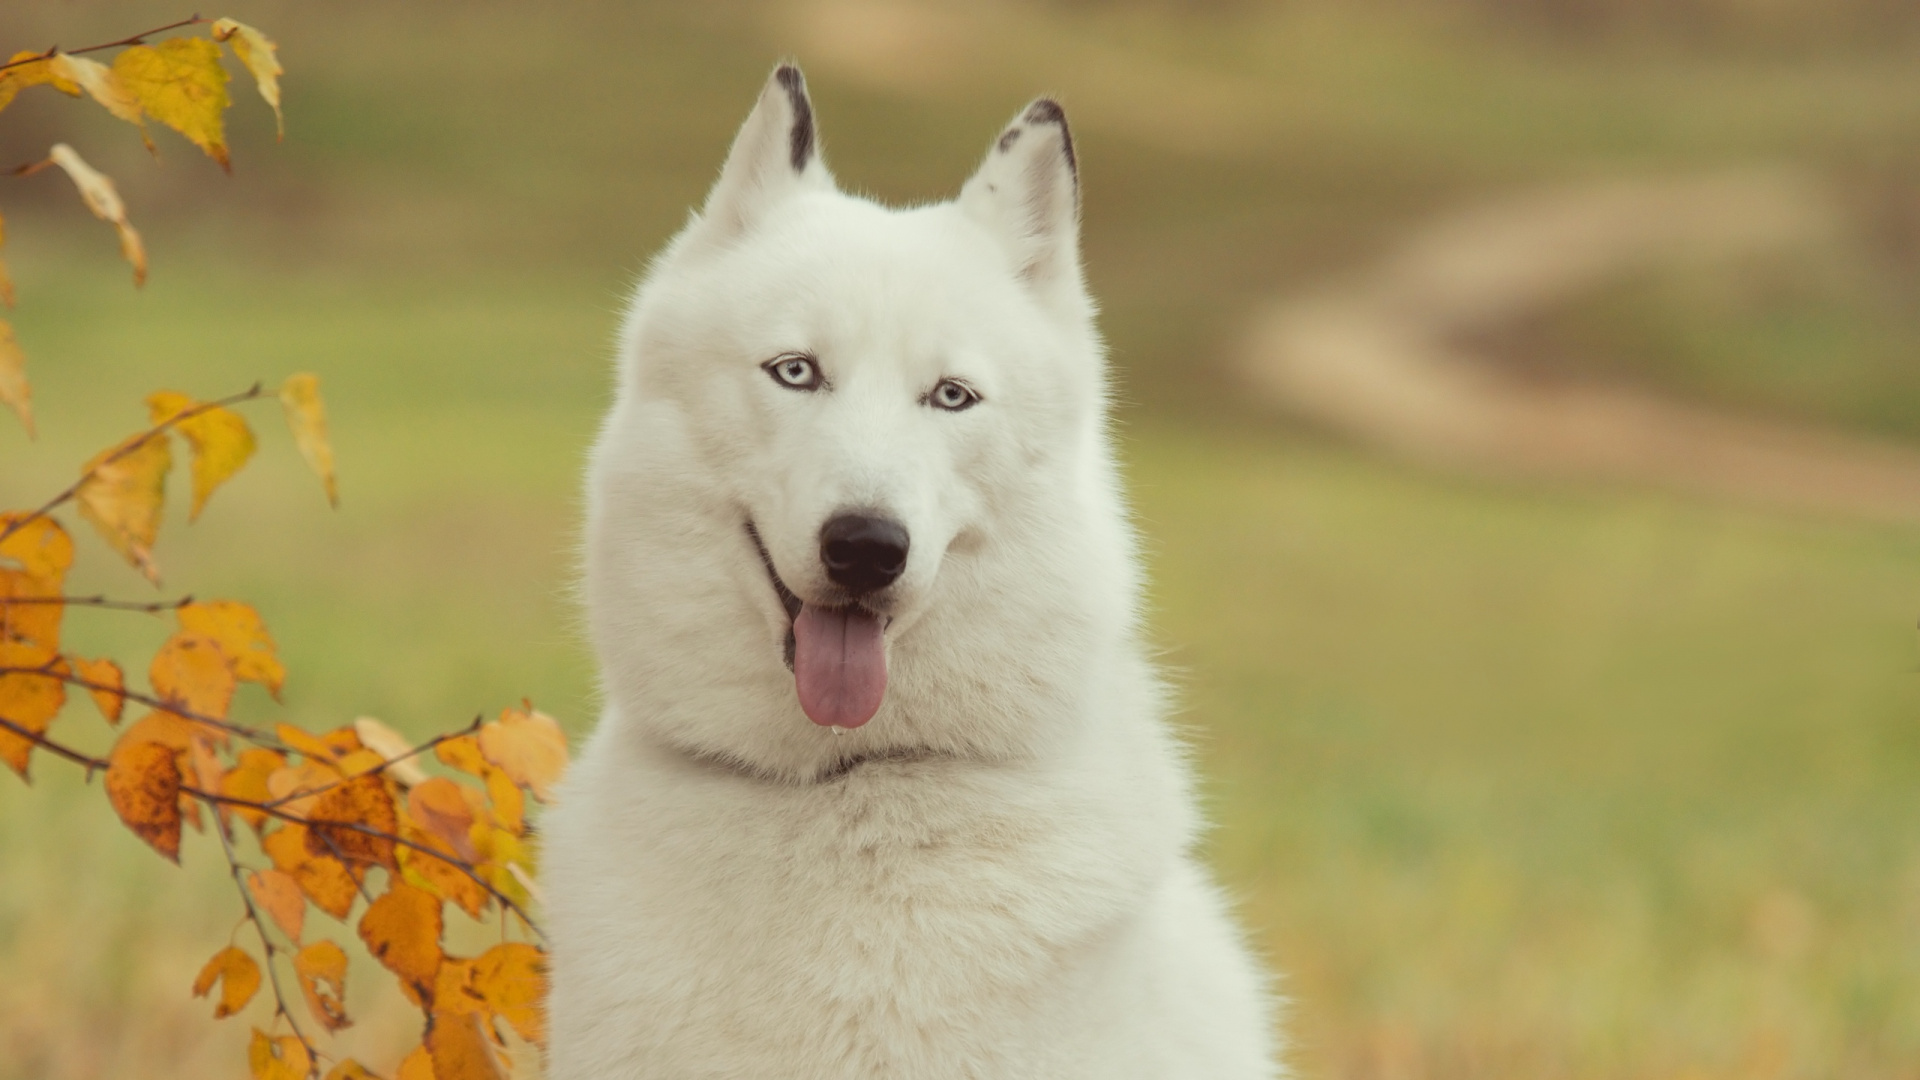 White Wolf on Green Grass Field During Daytime. Wallpaper in 1920x1080 Resolution